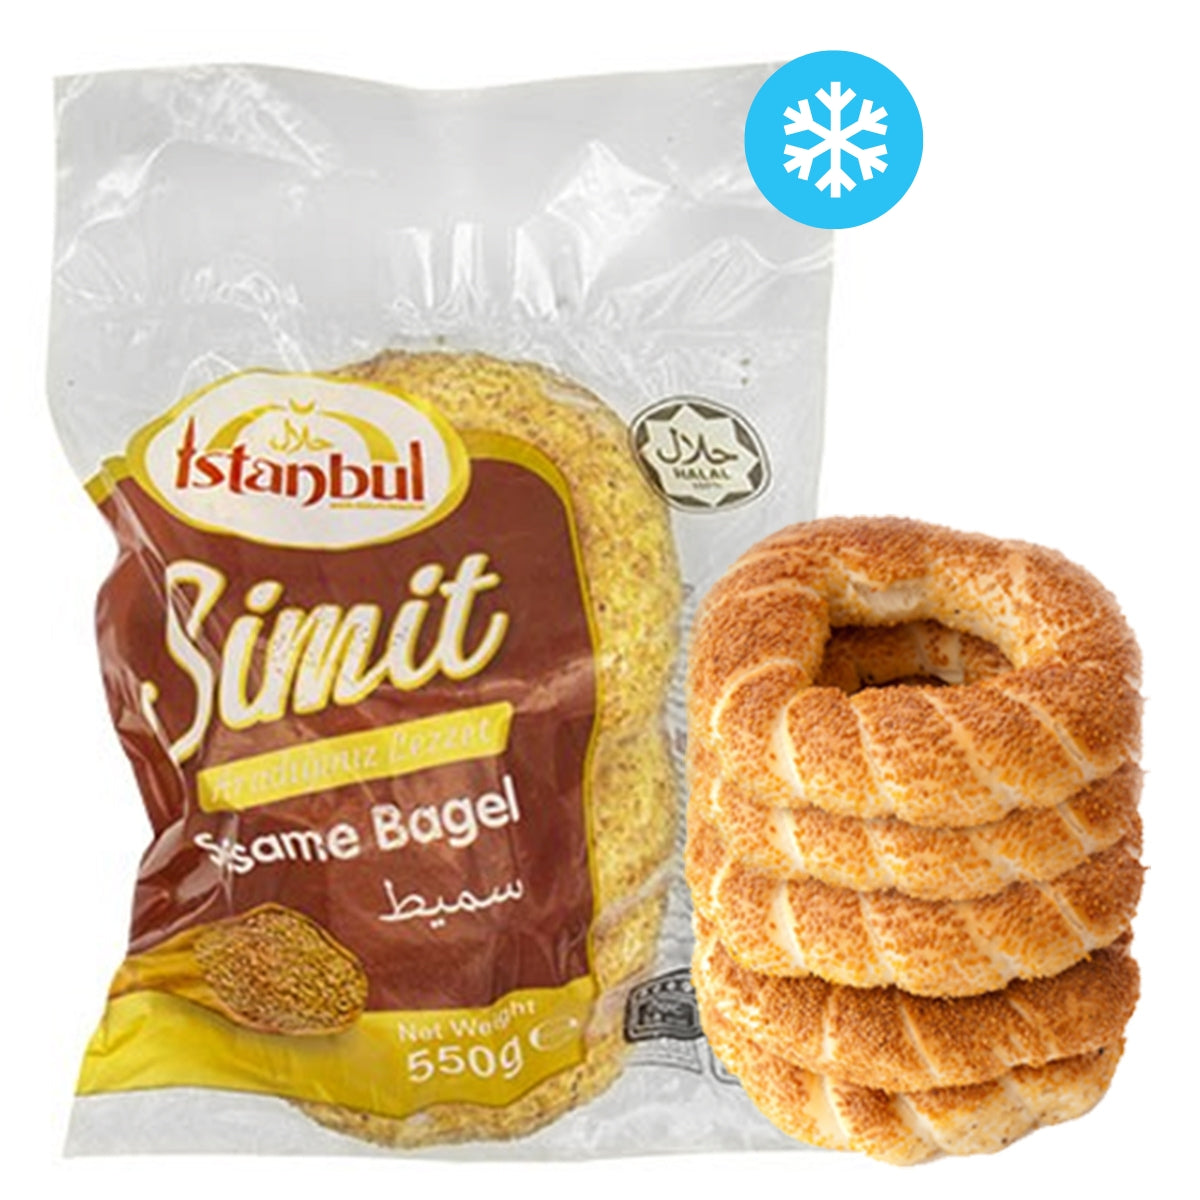 A packaged Istanbul - Simit (Sesame Bagel) 5 Pack - 550g, a tradition of sesame bagels, with a stack of simit bagels displayed in front.